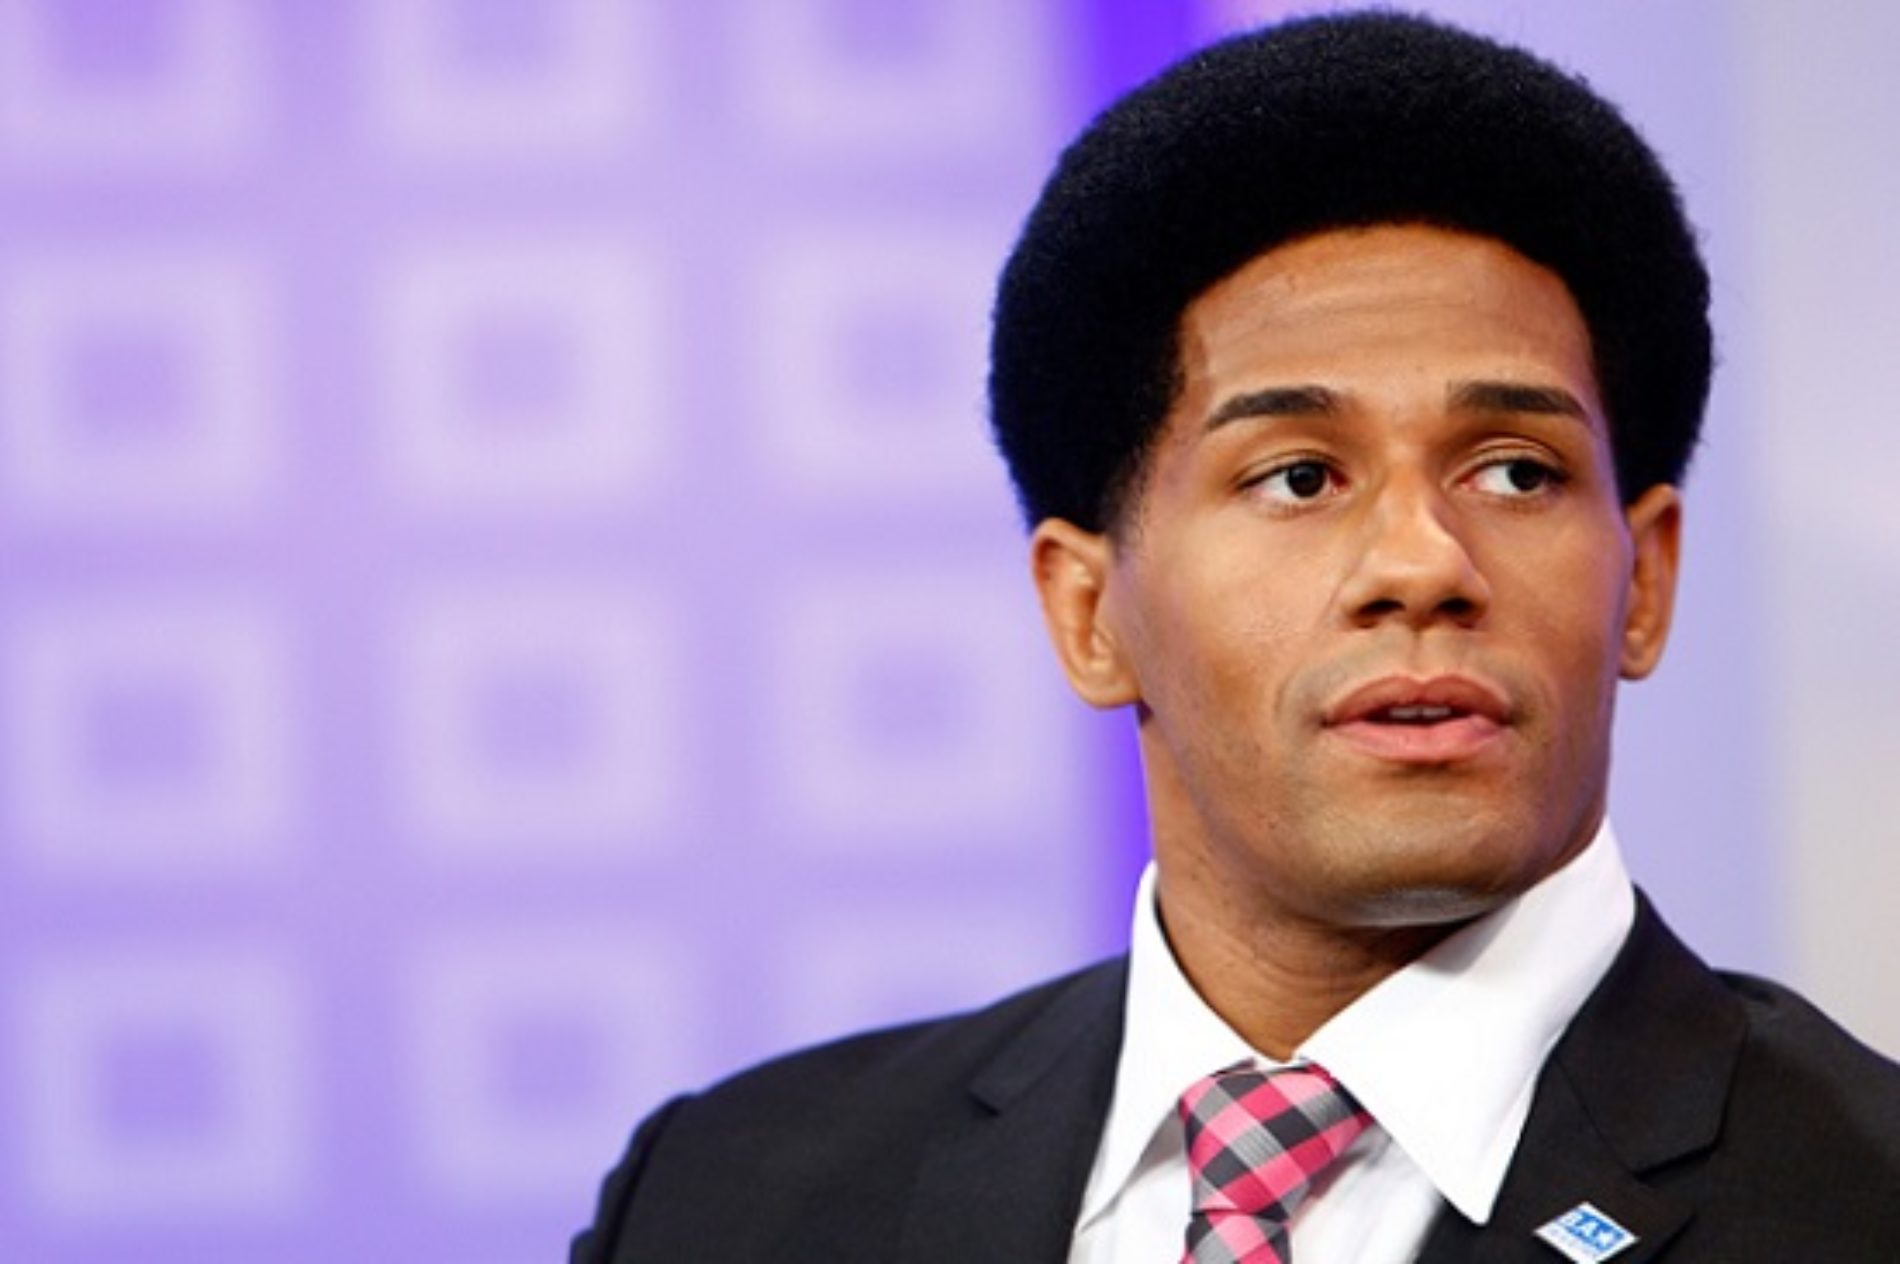 Gay Pro Wrestler Darren Young Wishes He’d Come Out Sooner